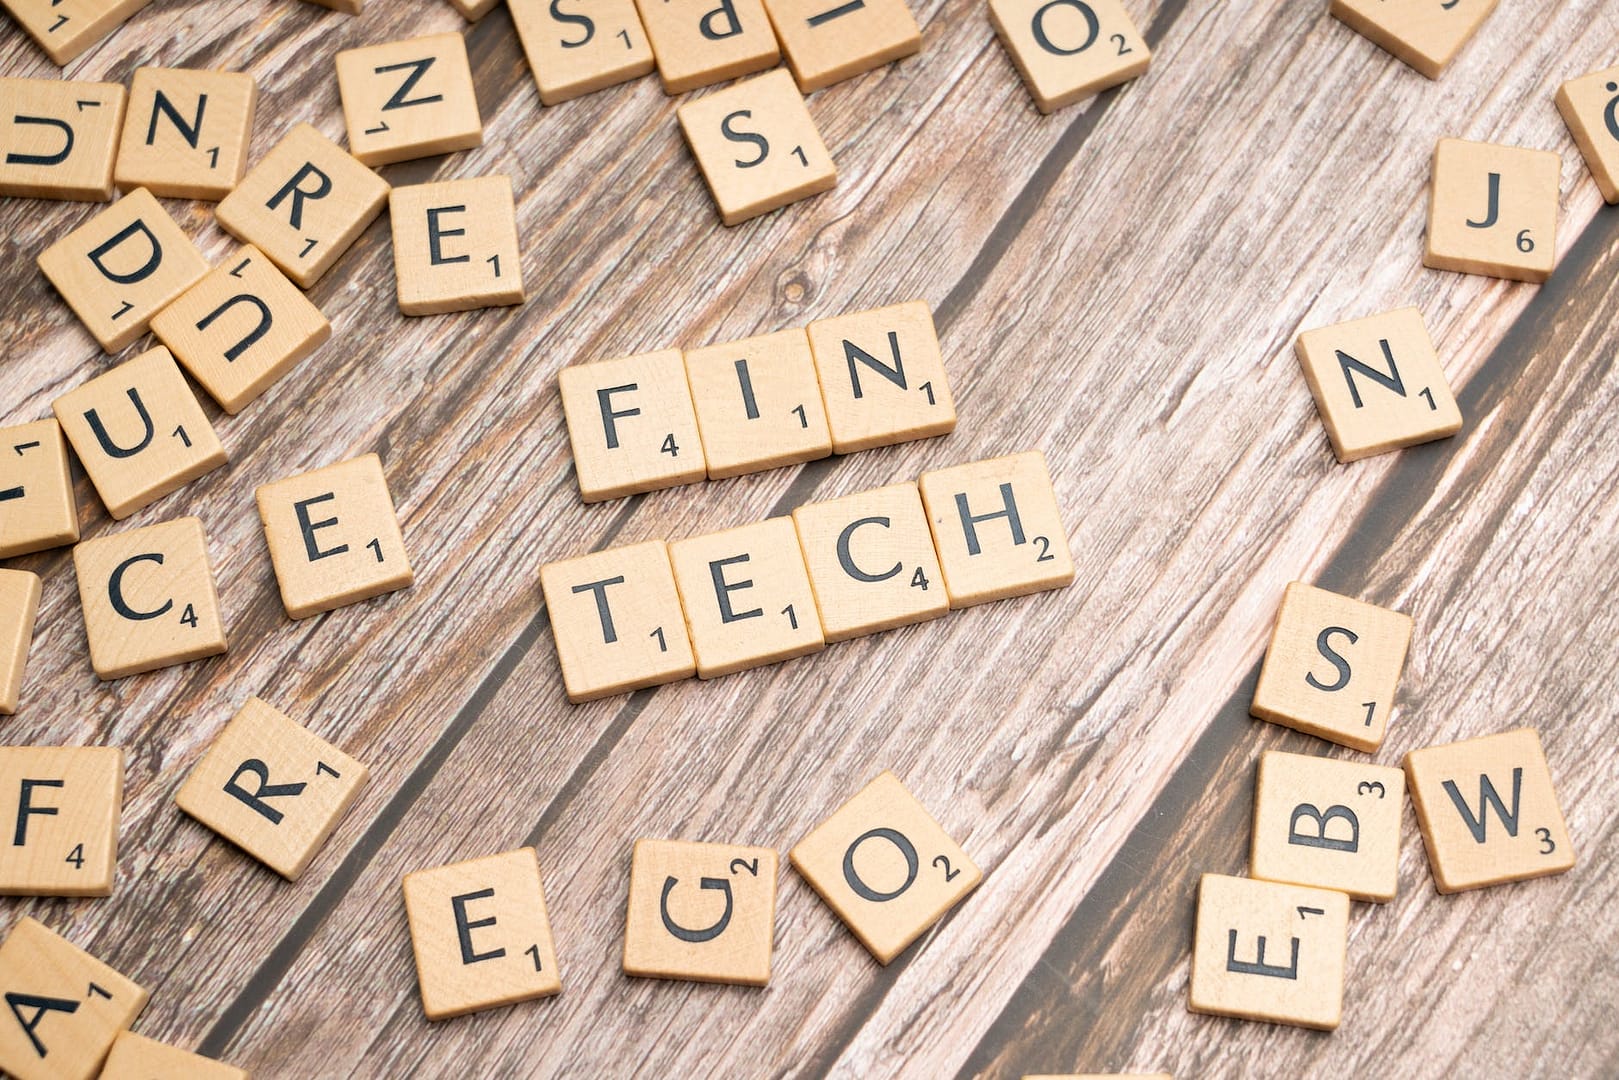 scrabble tiles spelling out the word fin tech